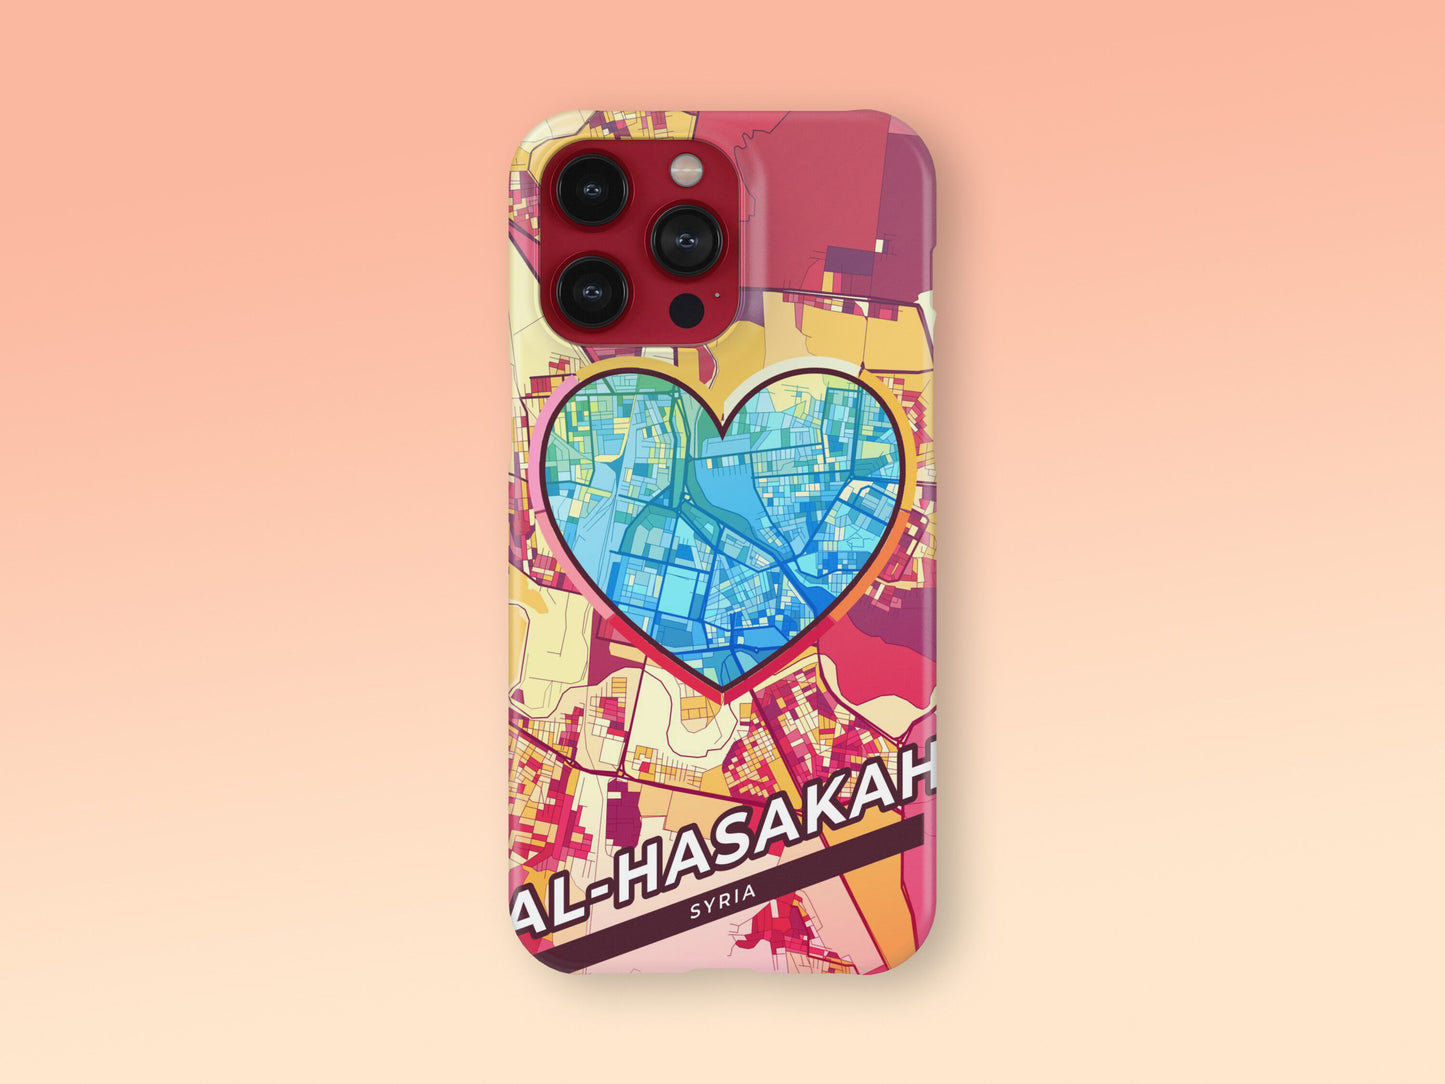 Al-Hasakah Syria slim phone case with colorful icon. Birthday, wedding or housewarming gift. Couple match cases. 2